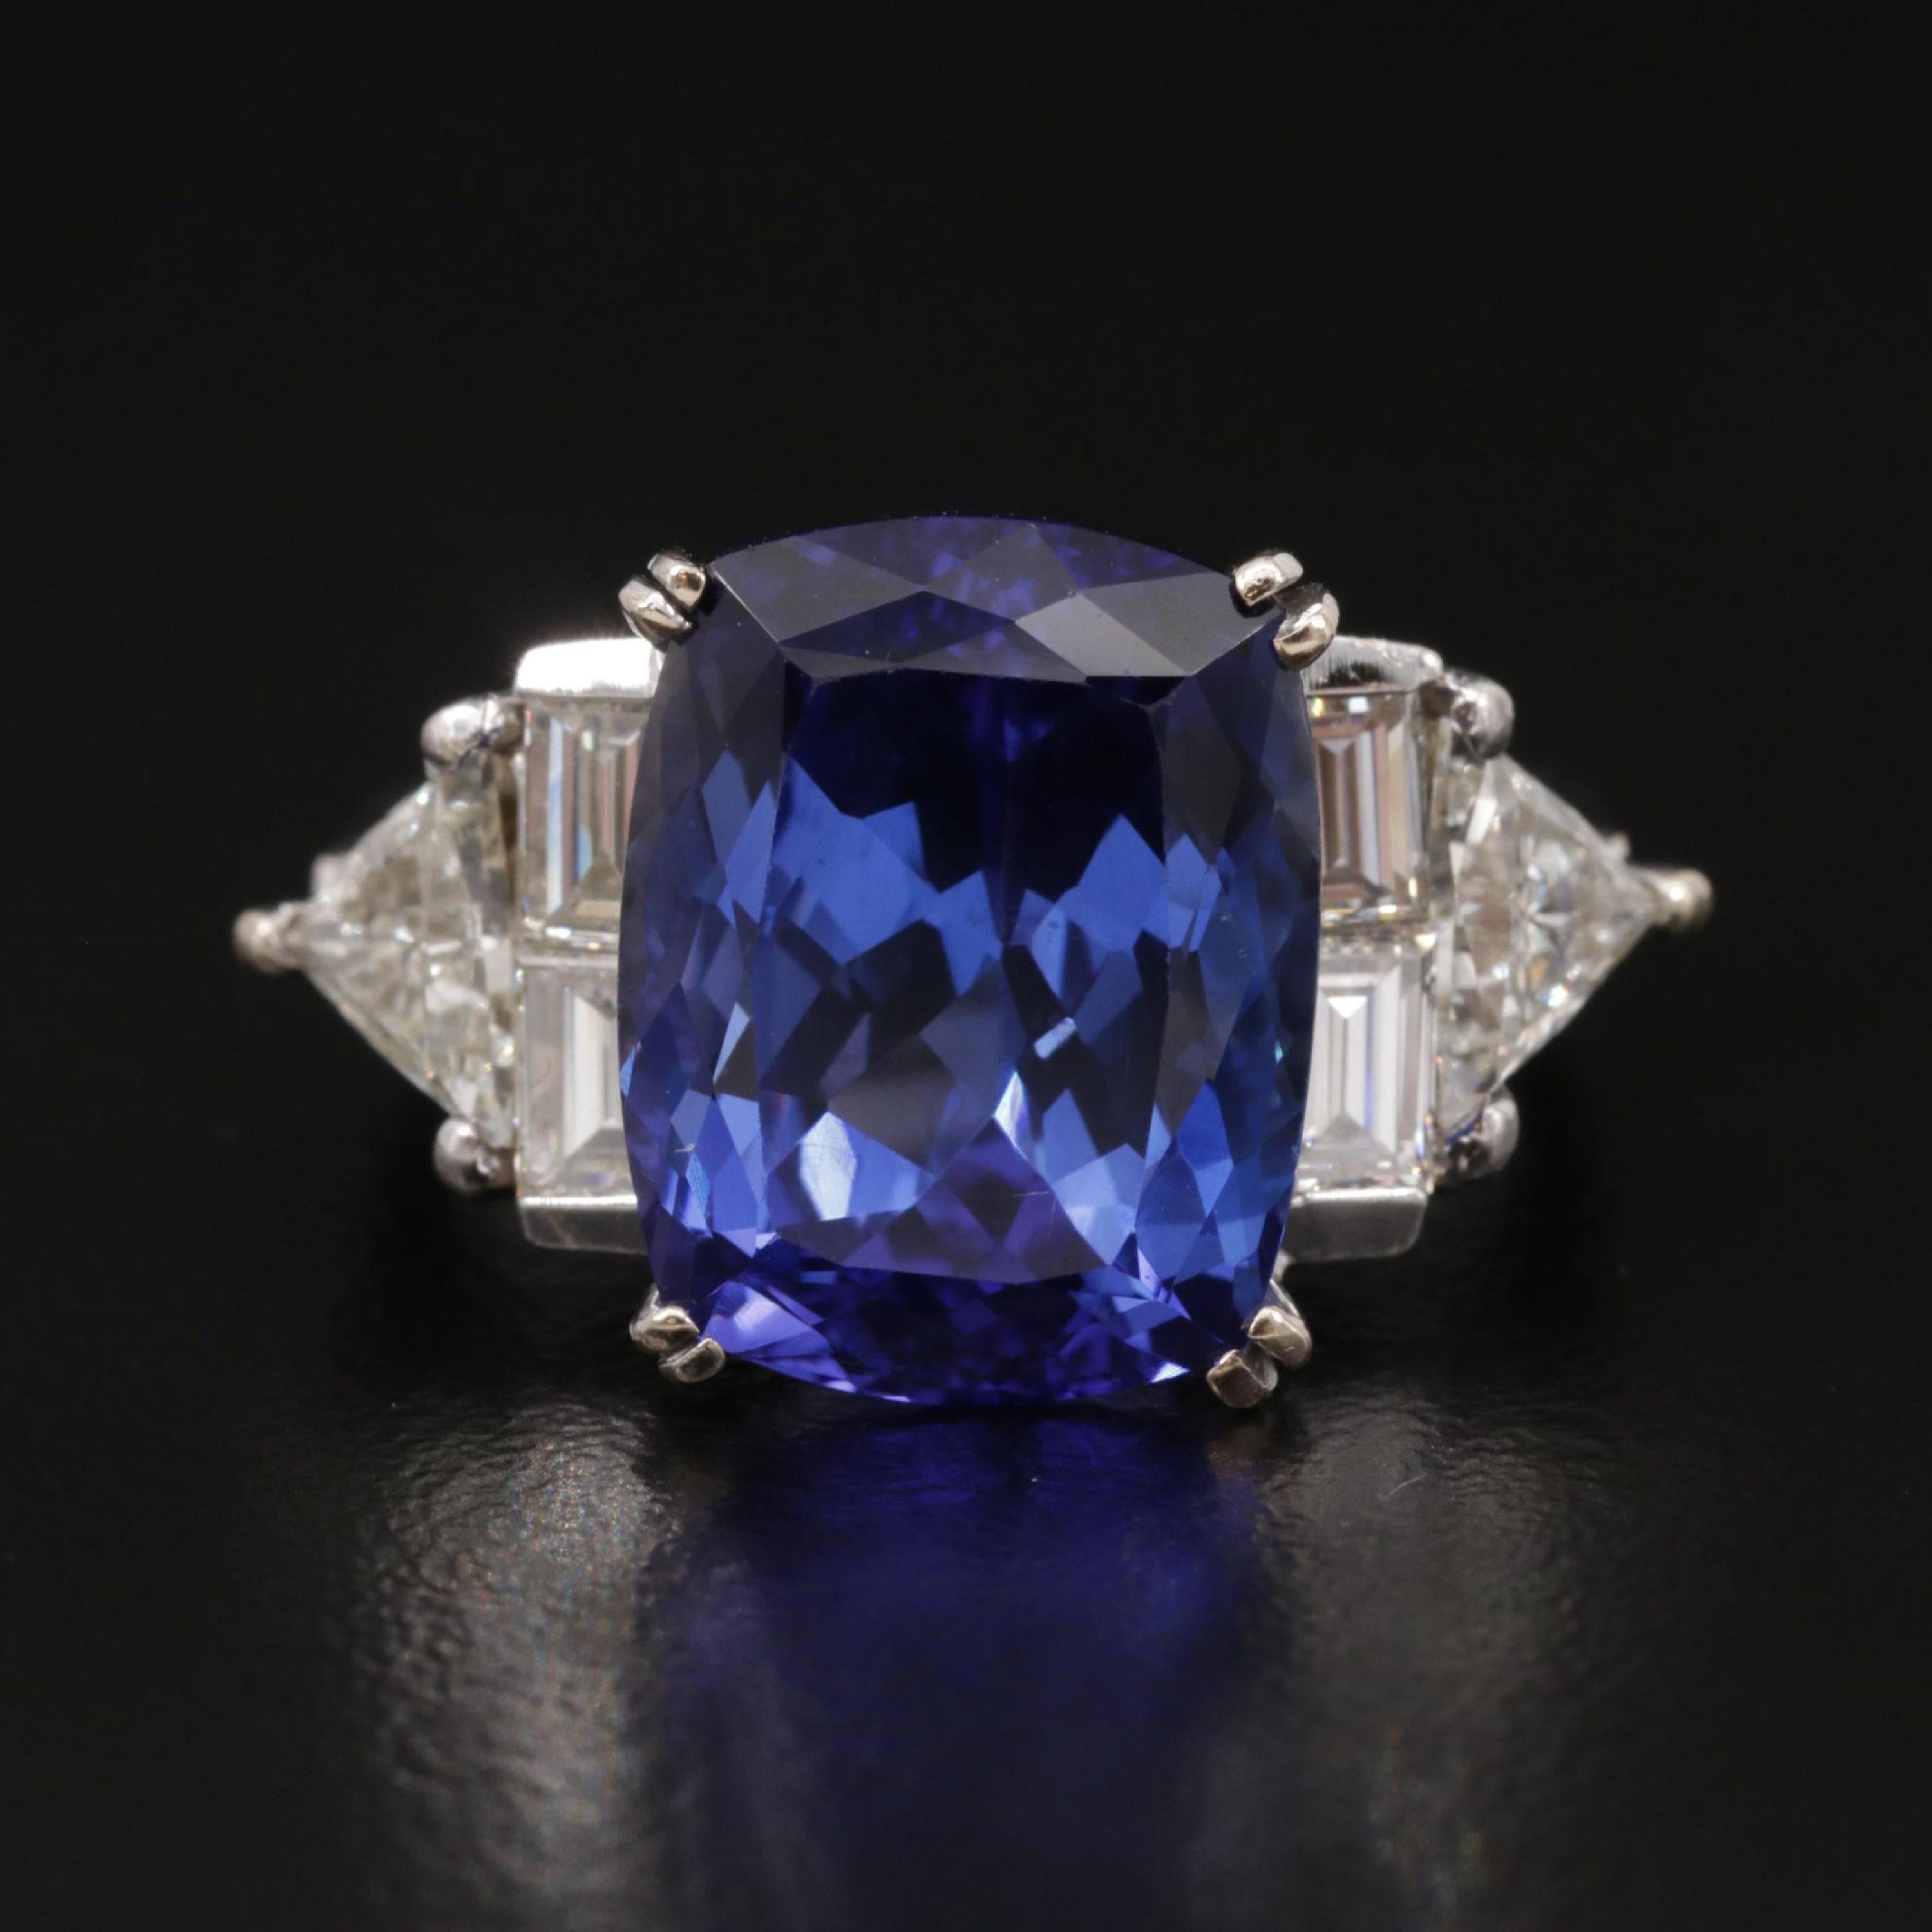 For Sale:  4 Carat Natural Sapphire Diamond Engagement Ring Set in 18K Gold, Cocktail Ring 2